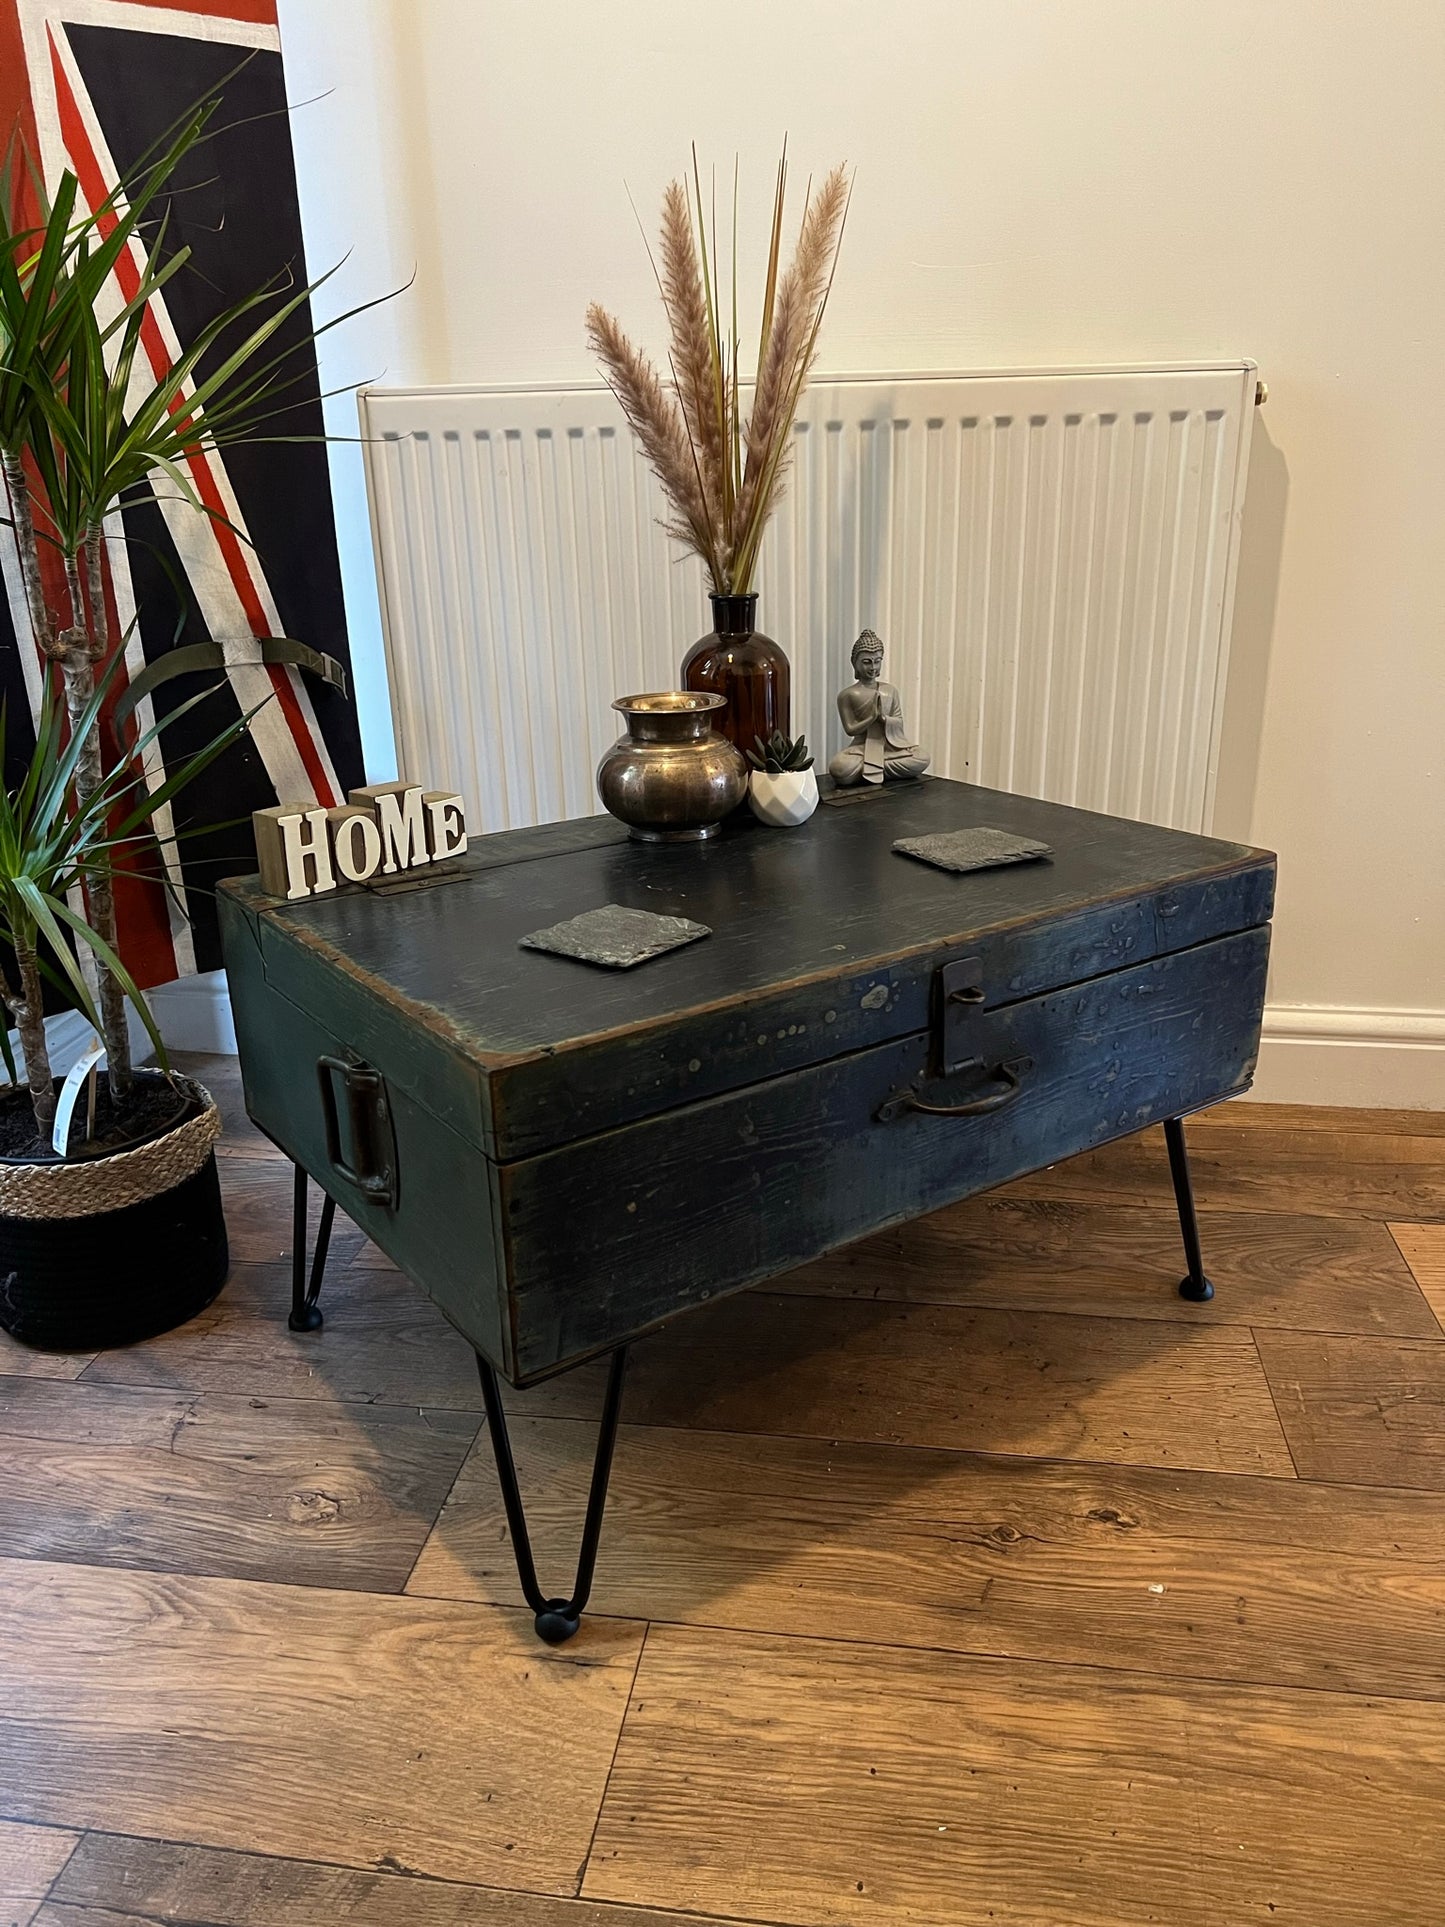 Vintage Industrial Carpenters Tool Chest Storage Coffee Table Reclaimed Rustic